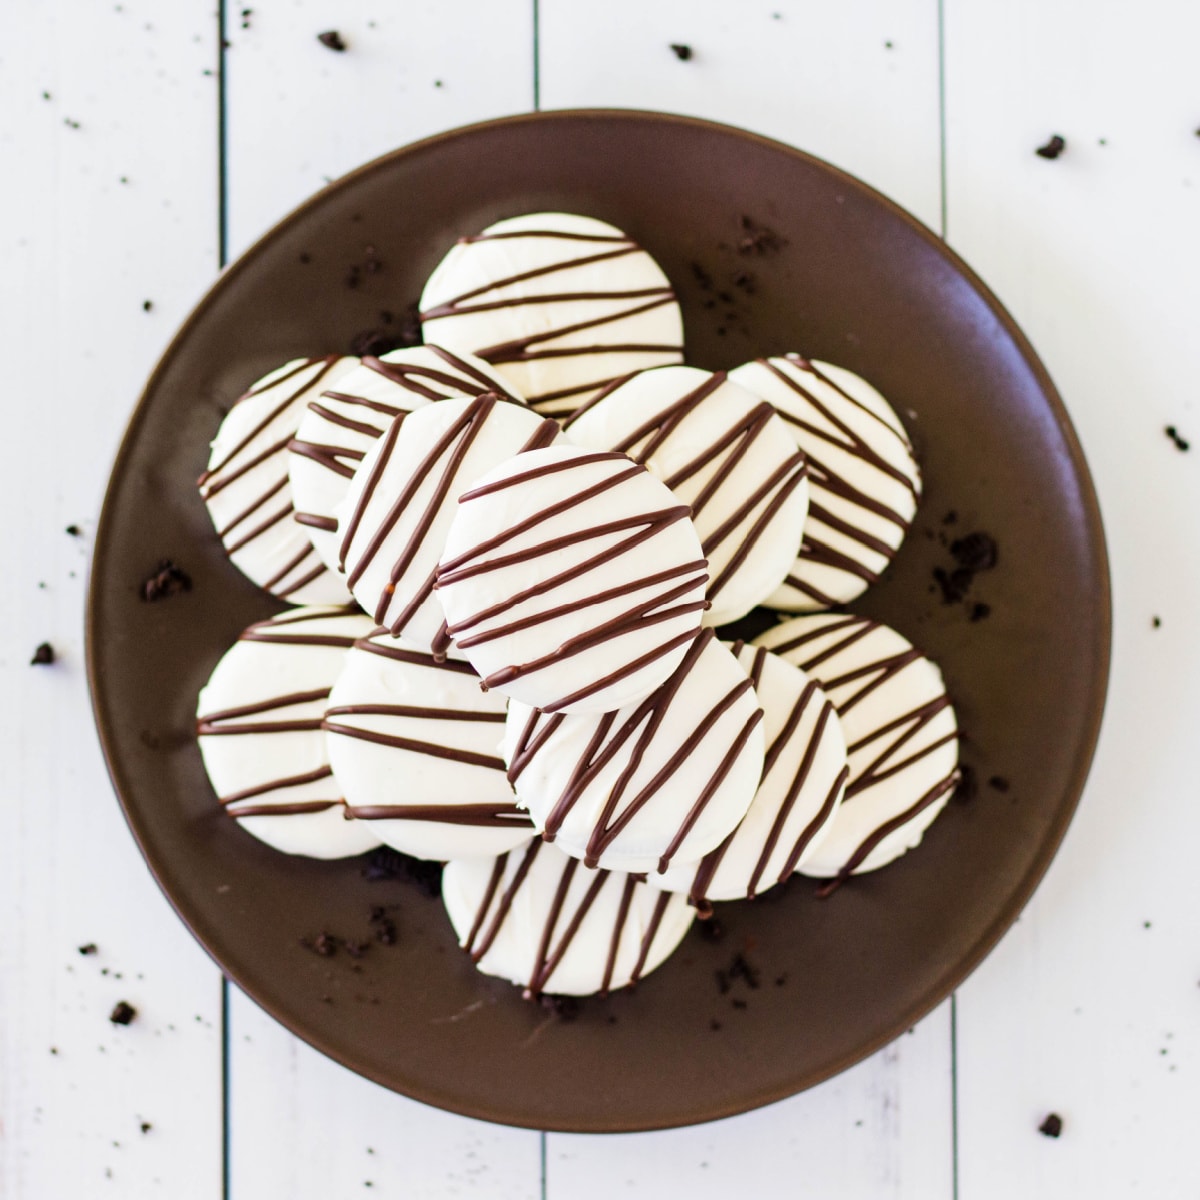 White Chocolate Covered Oreos from above